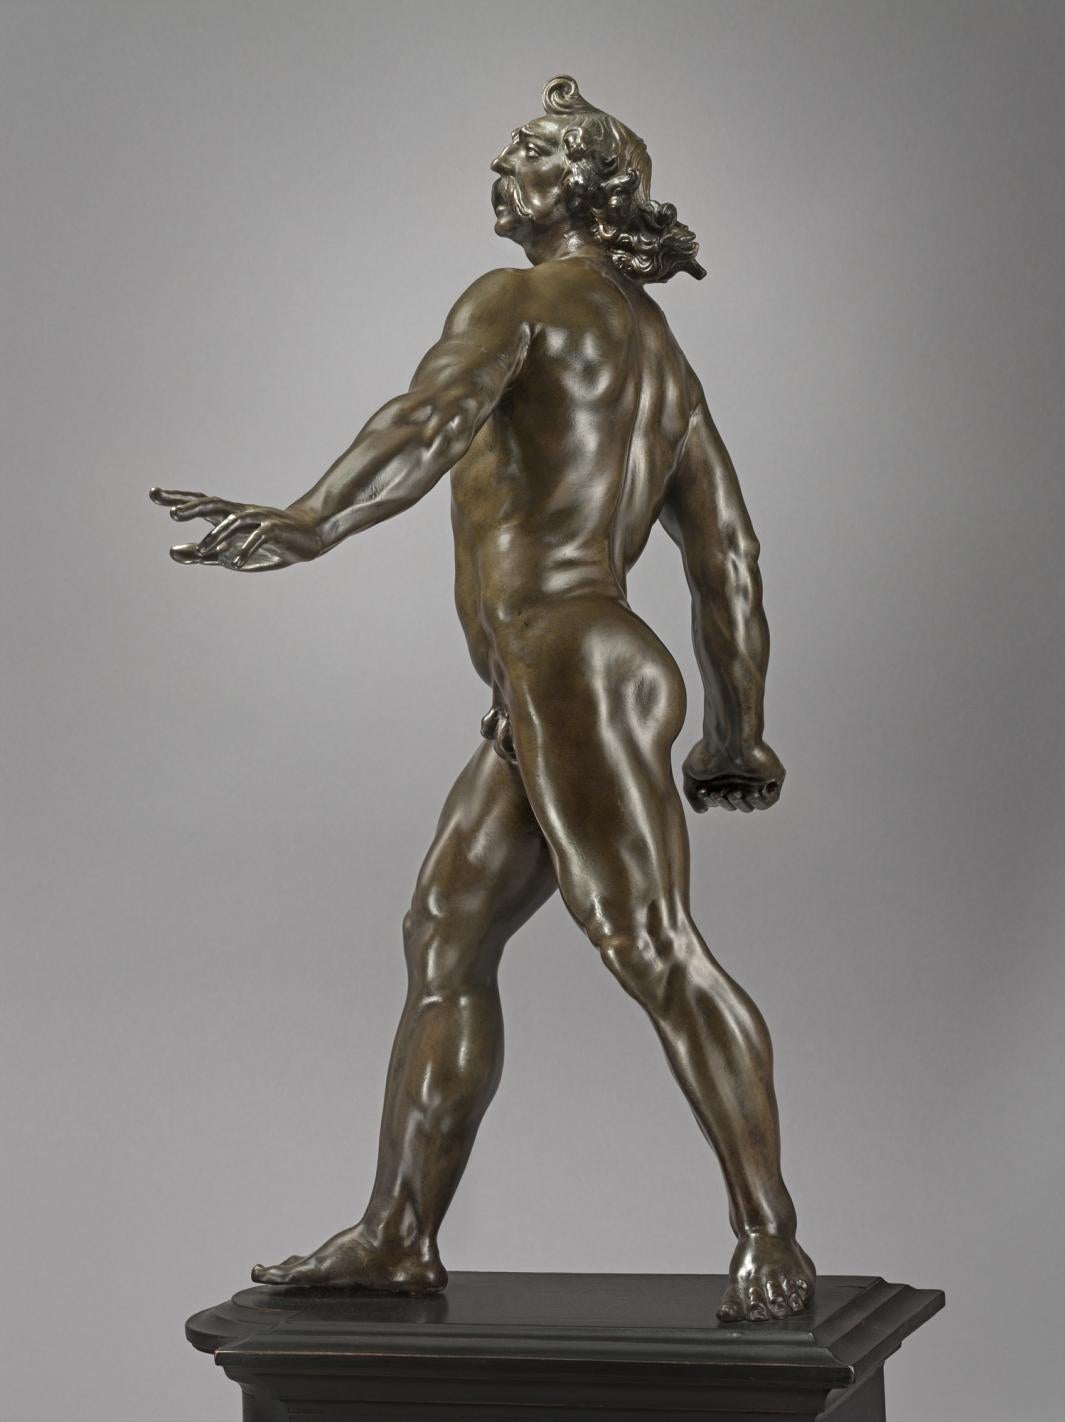 Bronze statue of man striding forward, side view.